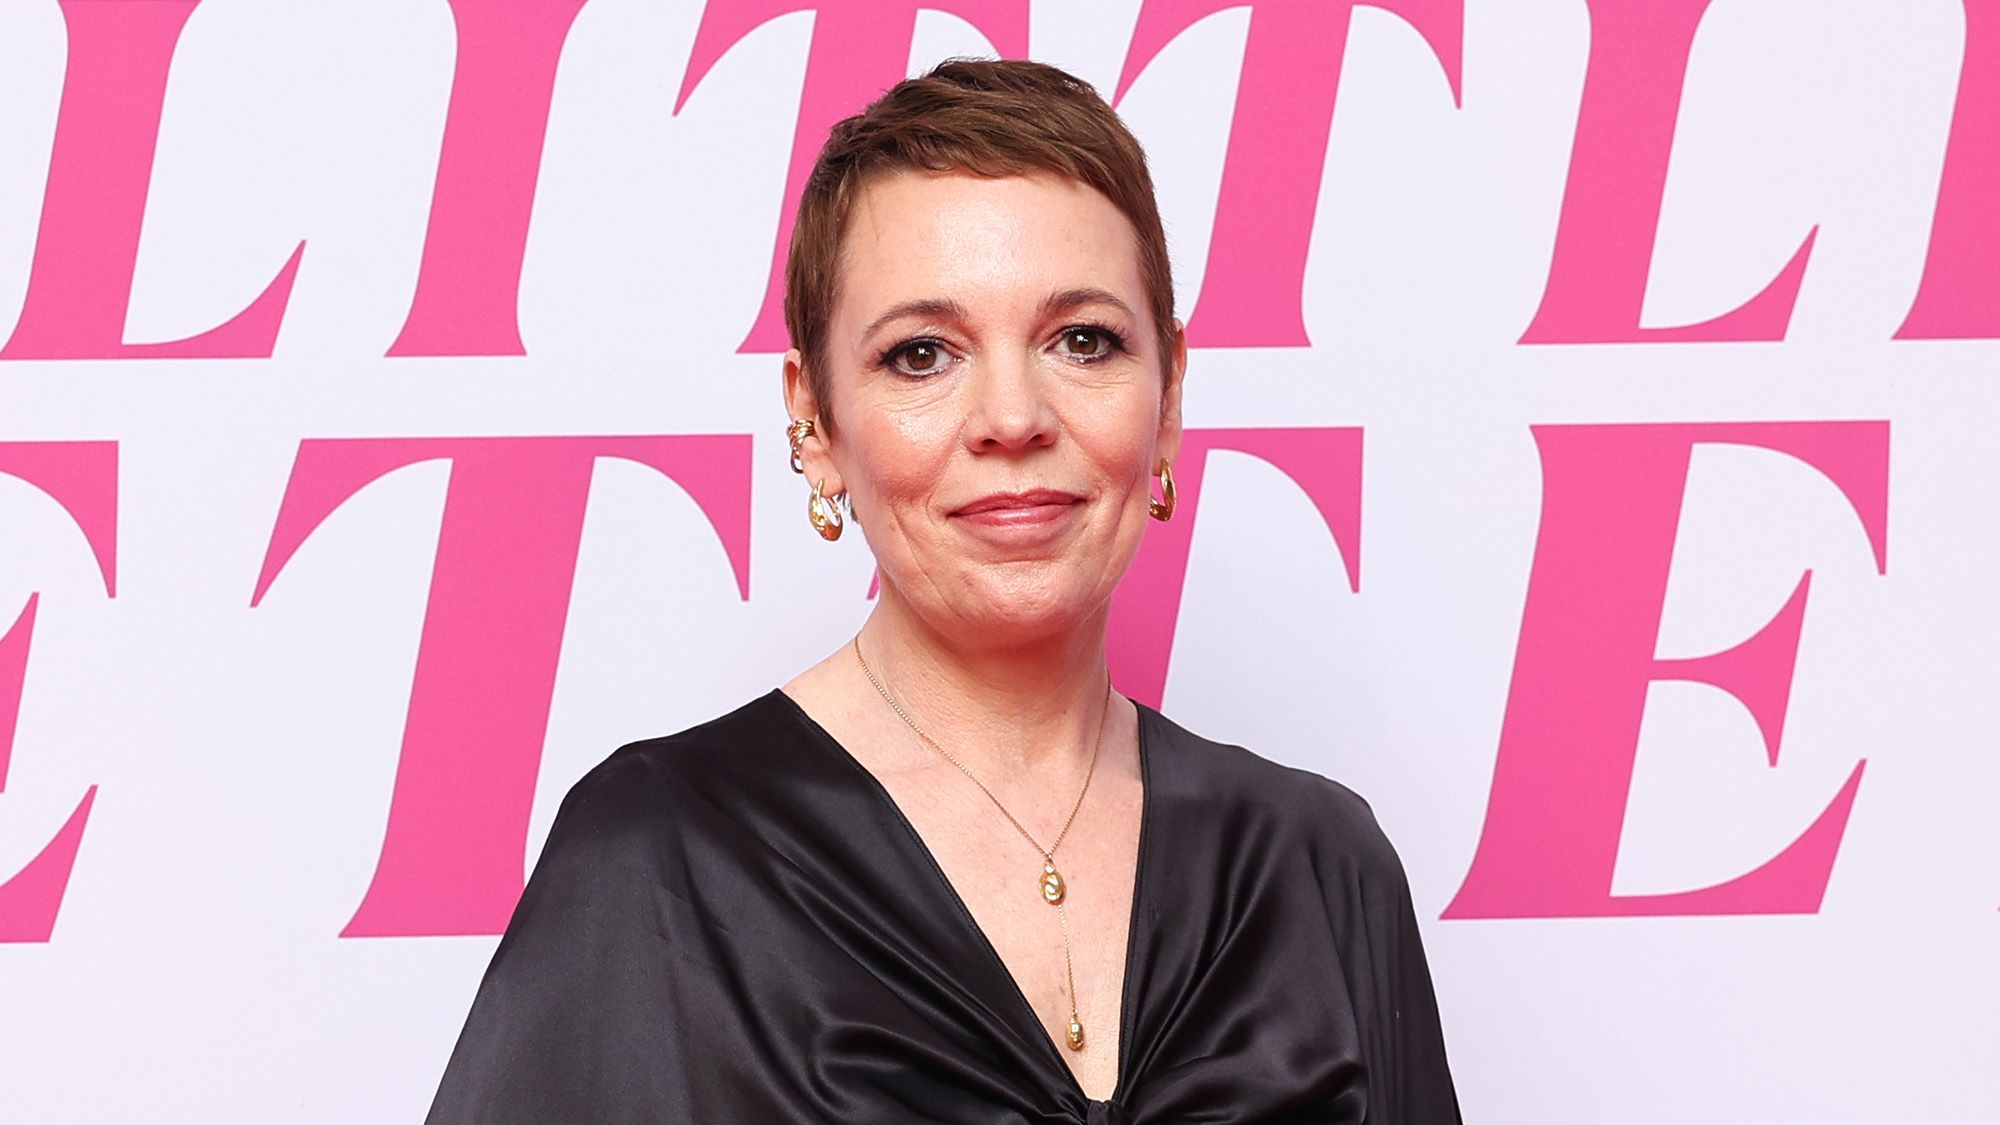 Olivia Colman says if she were a man, she’d be earning ‘a f**k of a lot more’ - Opinion and Analysis - News